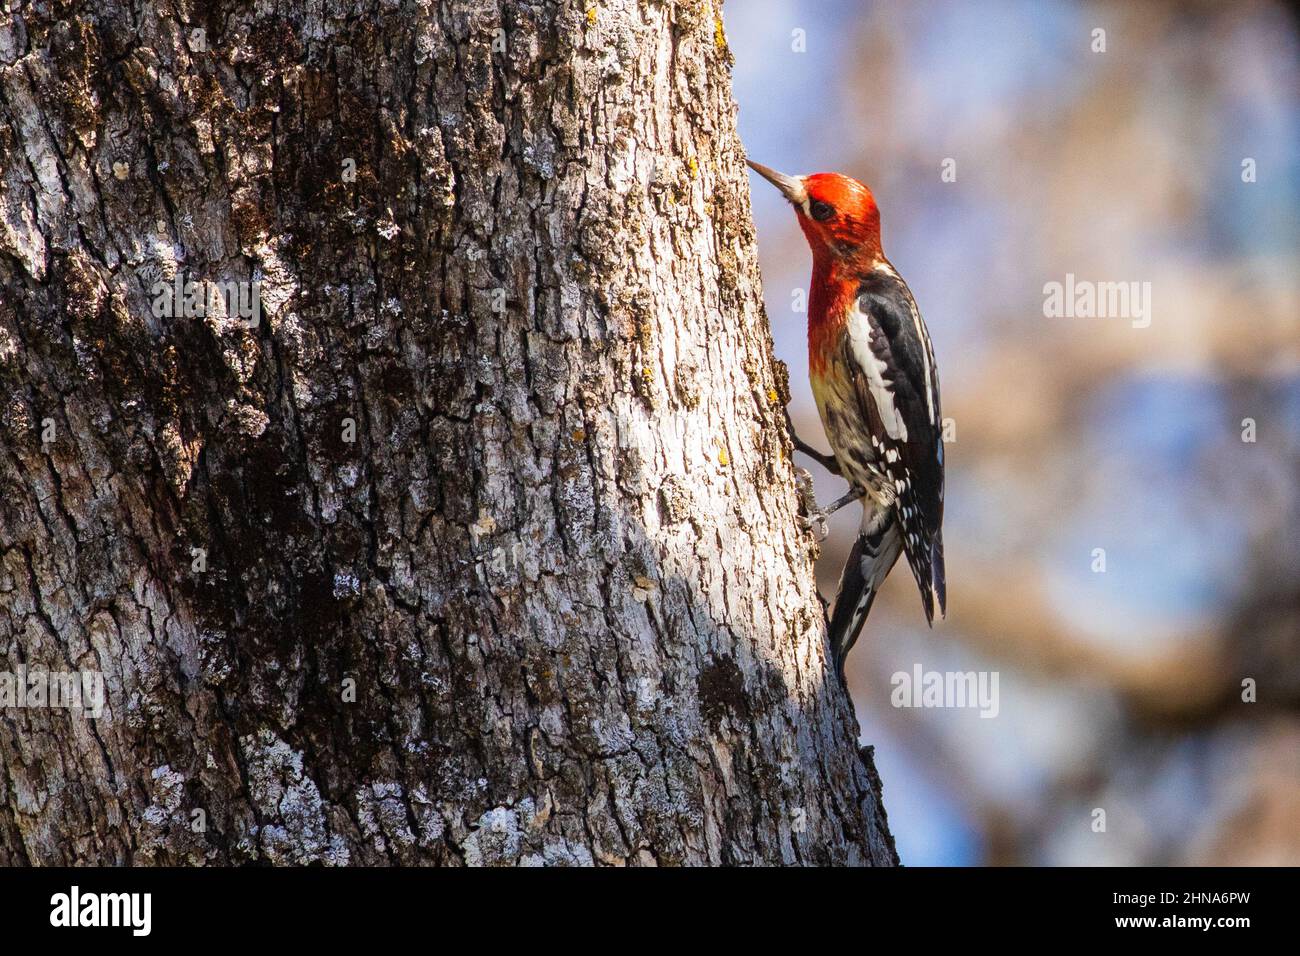 Red Breasted Sapsucker (Sphyrapicus rube) pecking at an oak tree.  Photographed in Redding California, USA Stock Photo